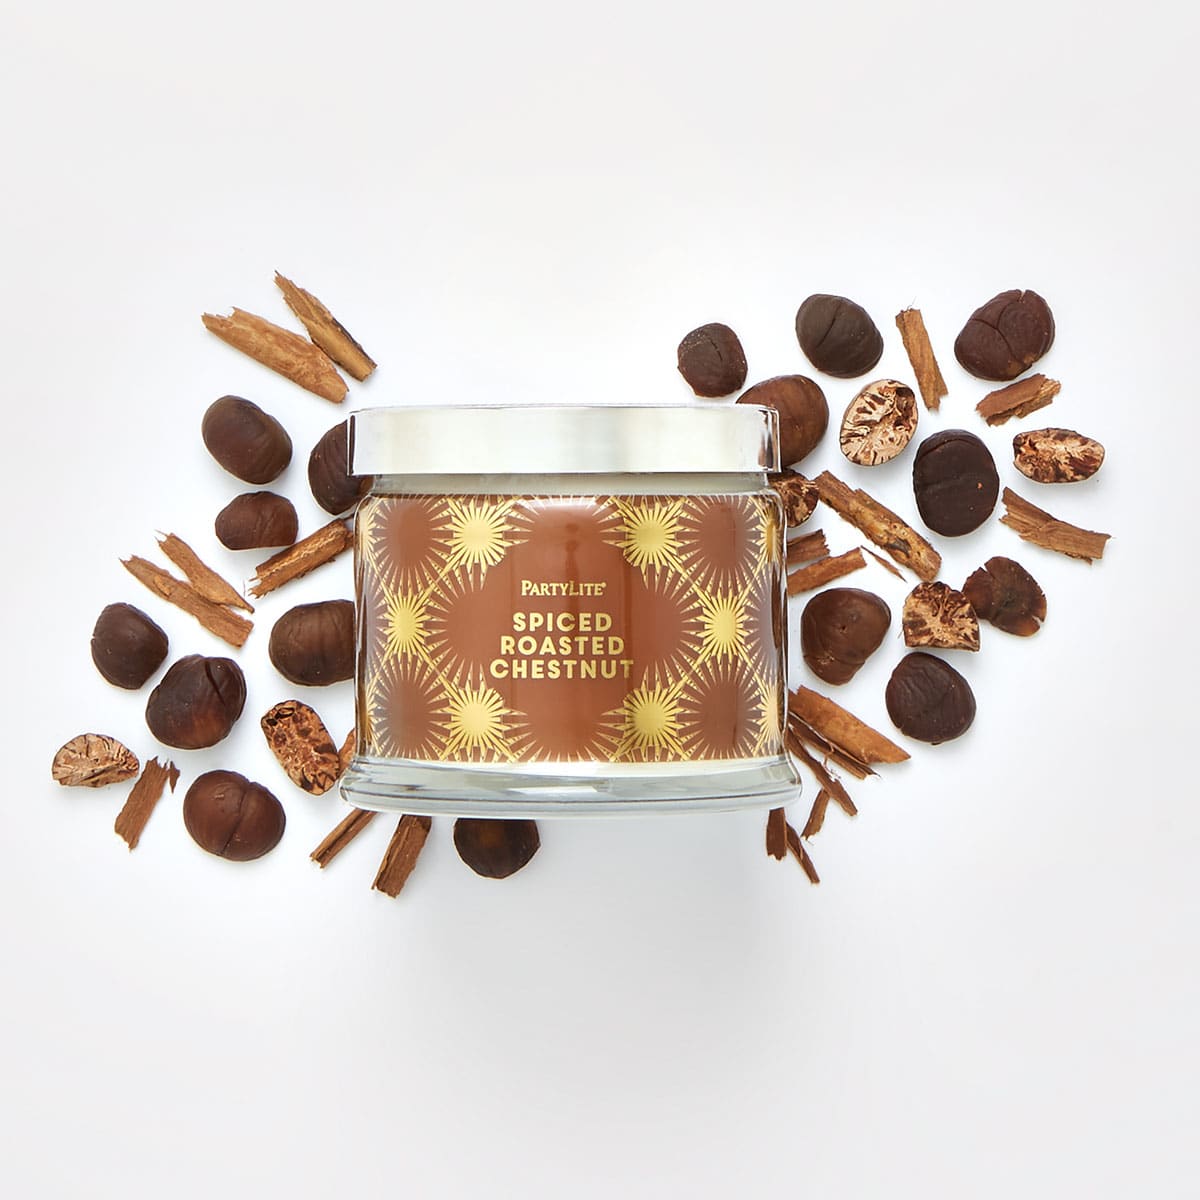 Spiced Roasted Chestnut 3-Wick Jar Candle